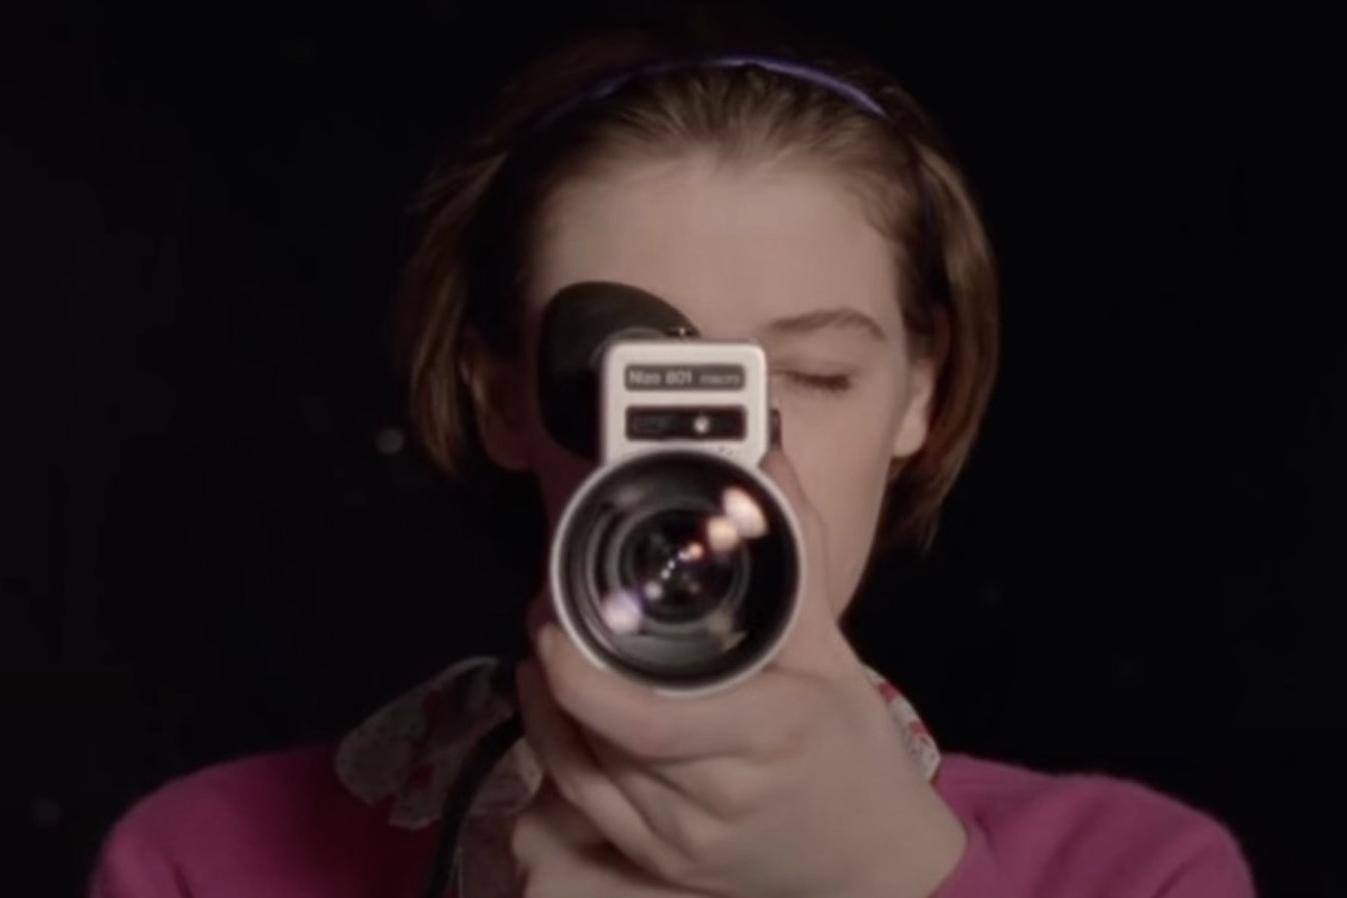 Film still from THE SOUVENIR PART II, showing Honor Swinton Byrne as Julie, looking through a hand-held movie camera at us.